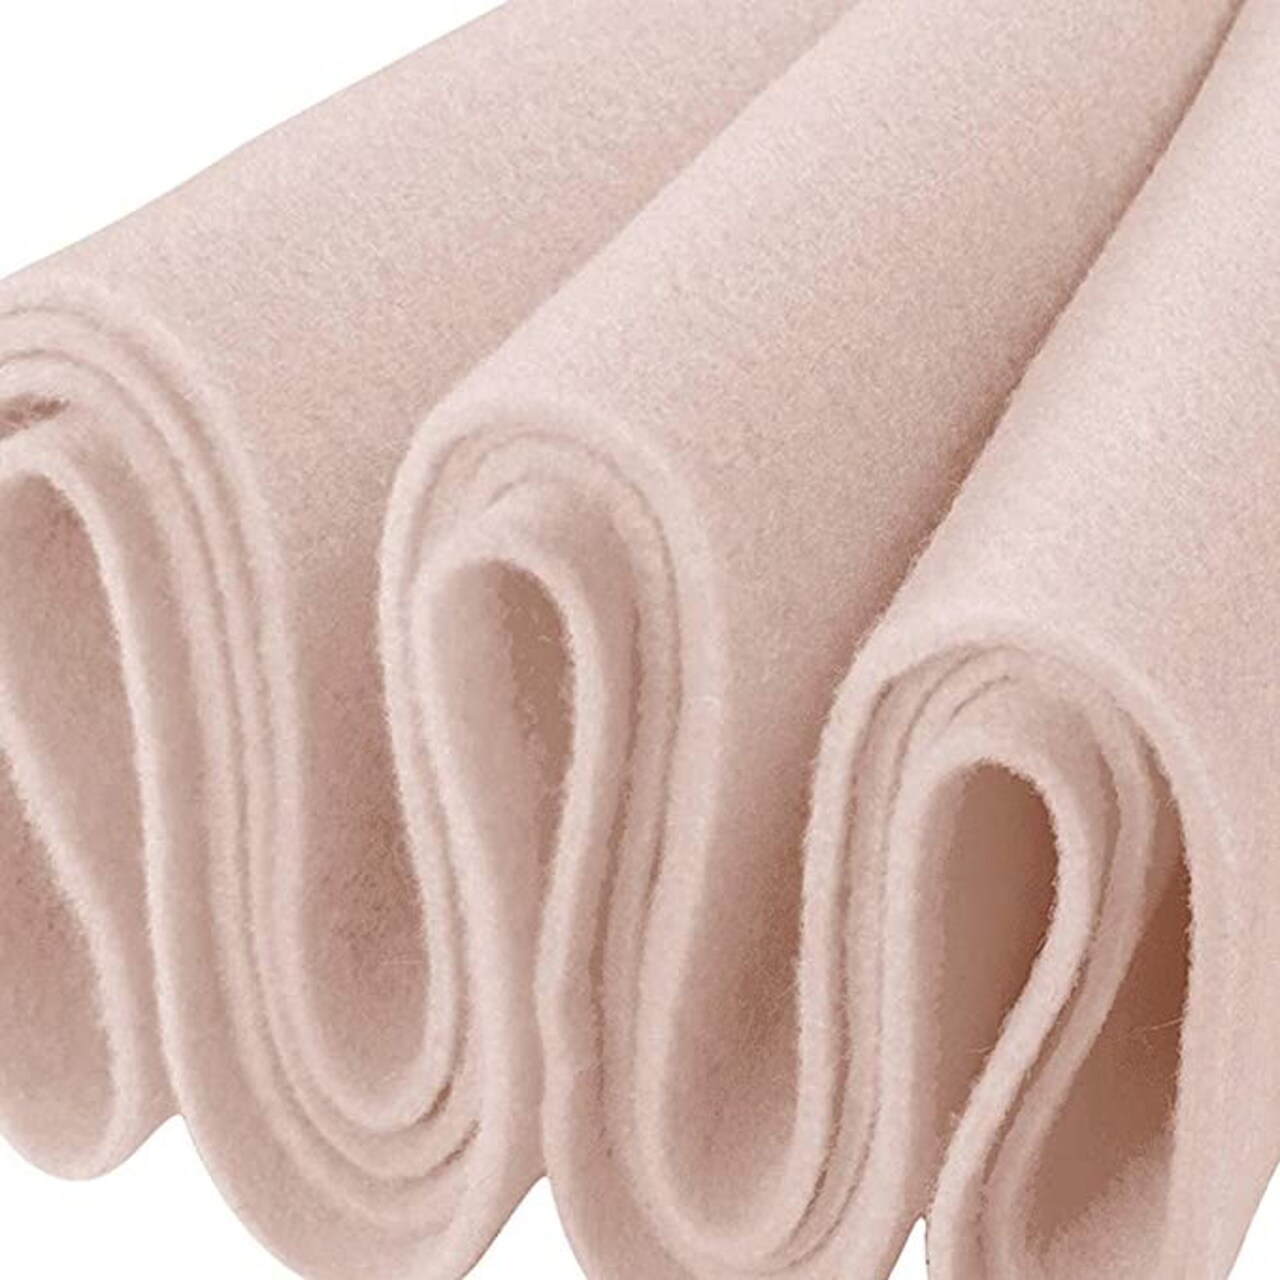 FabricLA Acrylic Felt Fabric - 72 Inch Wide 1.6mm Thick Felt by The Yard -  Use Soft Felt Sheets for Sewing, Cushion, and Padding, DIY Arts & Crafts (9  Yards, Sand)